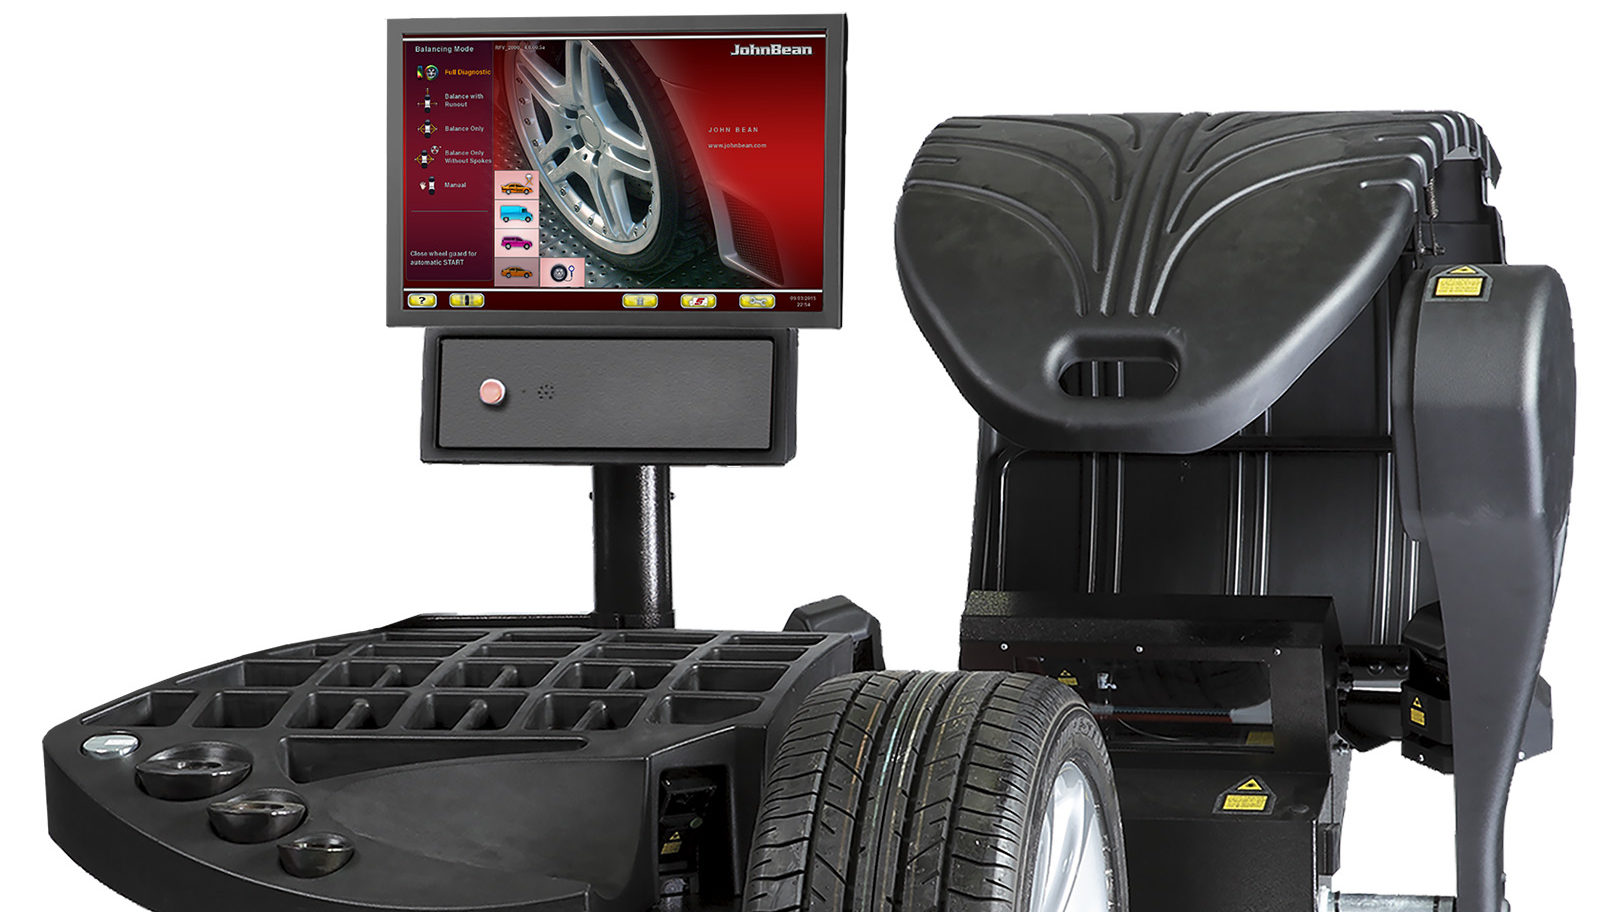 John Bean has redesigned its software user interface for its B2000P Wheel Balancer to improve functionality and boost performance.